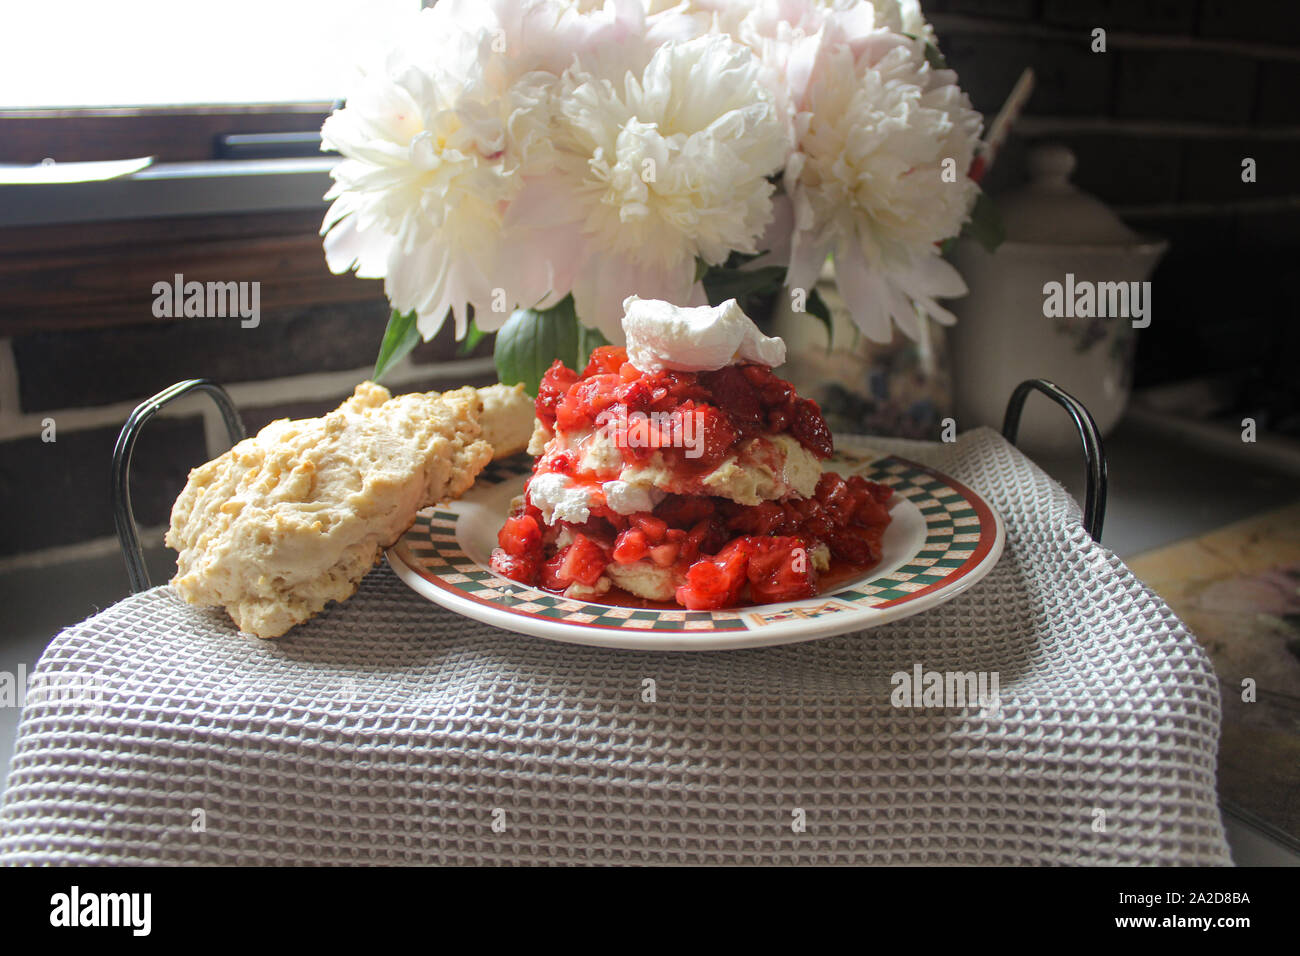 Prepared Strawberry Shortcake Dessert Stack In Front of Peonies Stock Photo